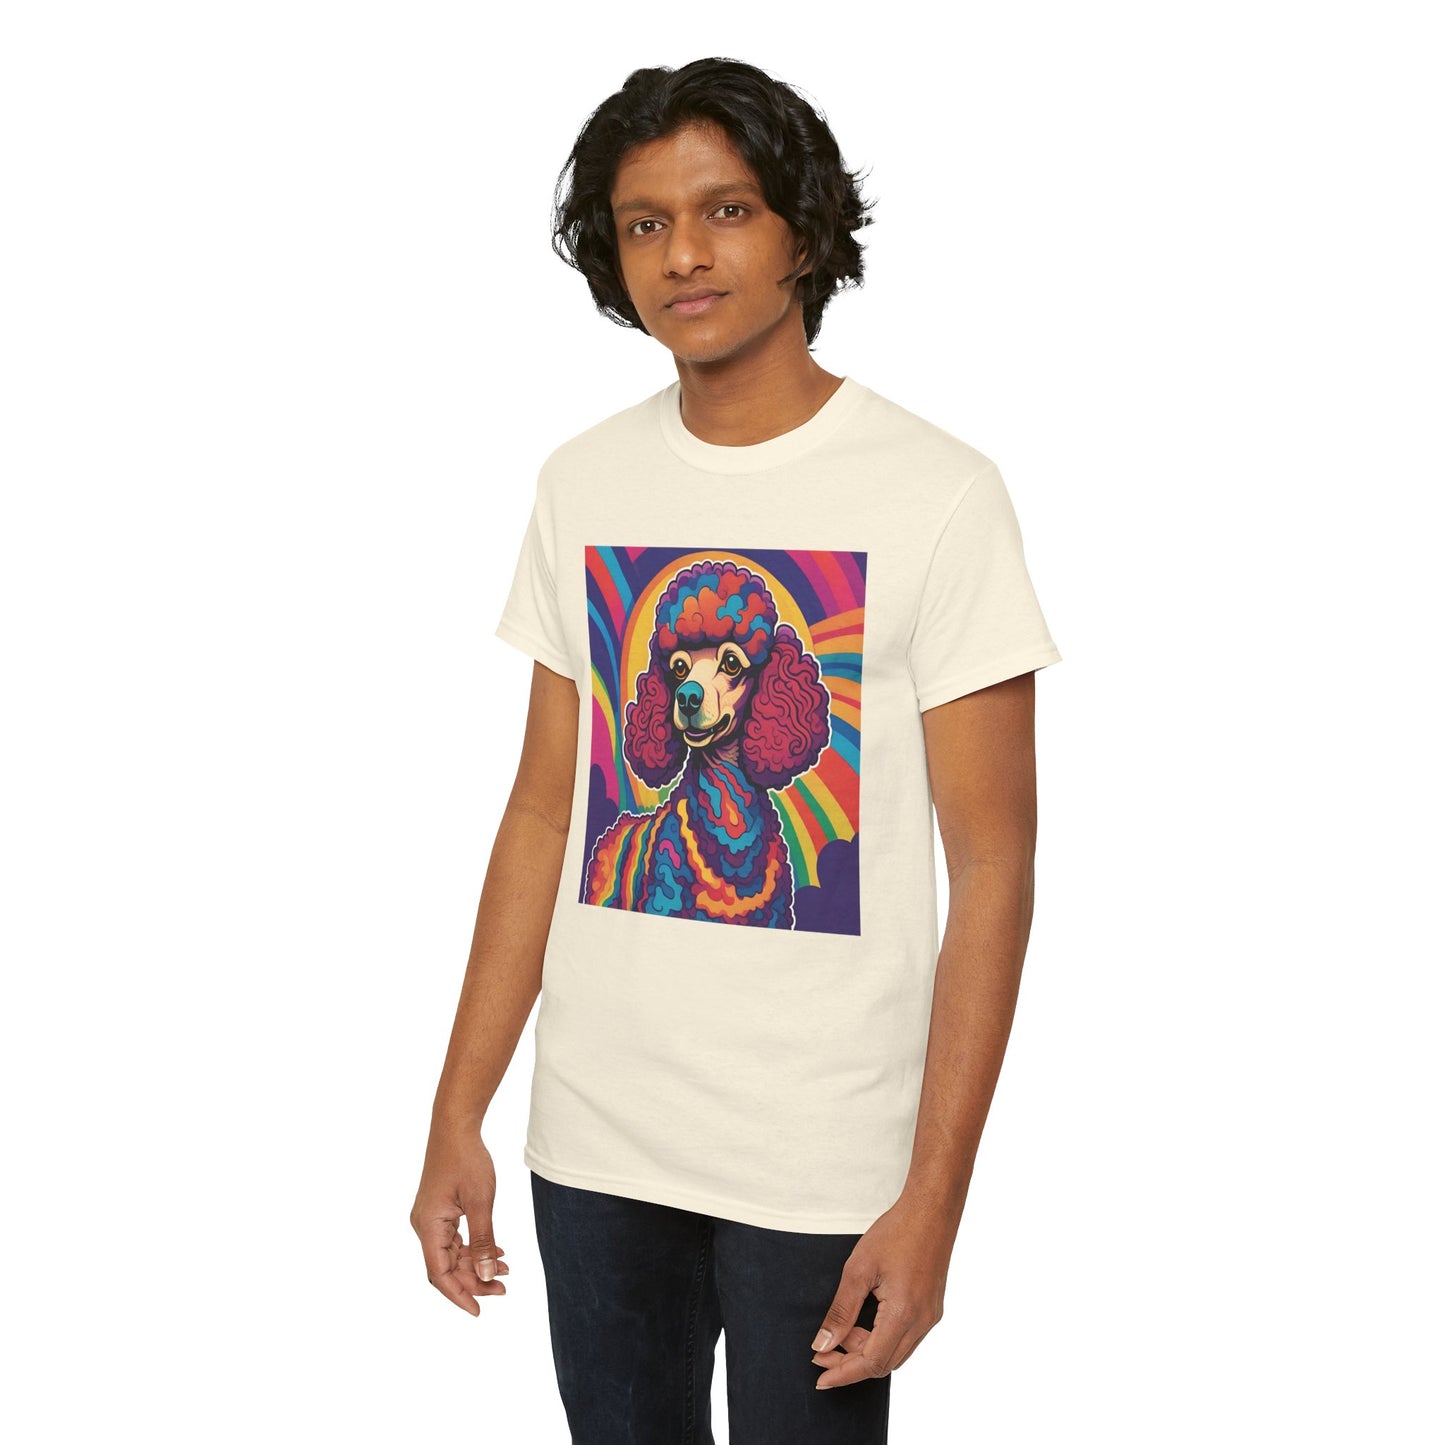 Psychedelic Poodle T-shirt